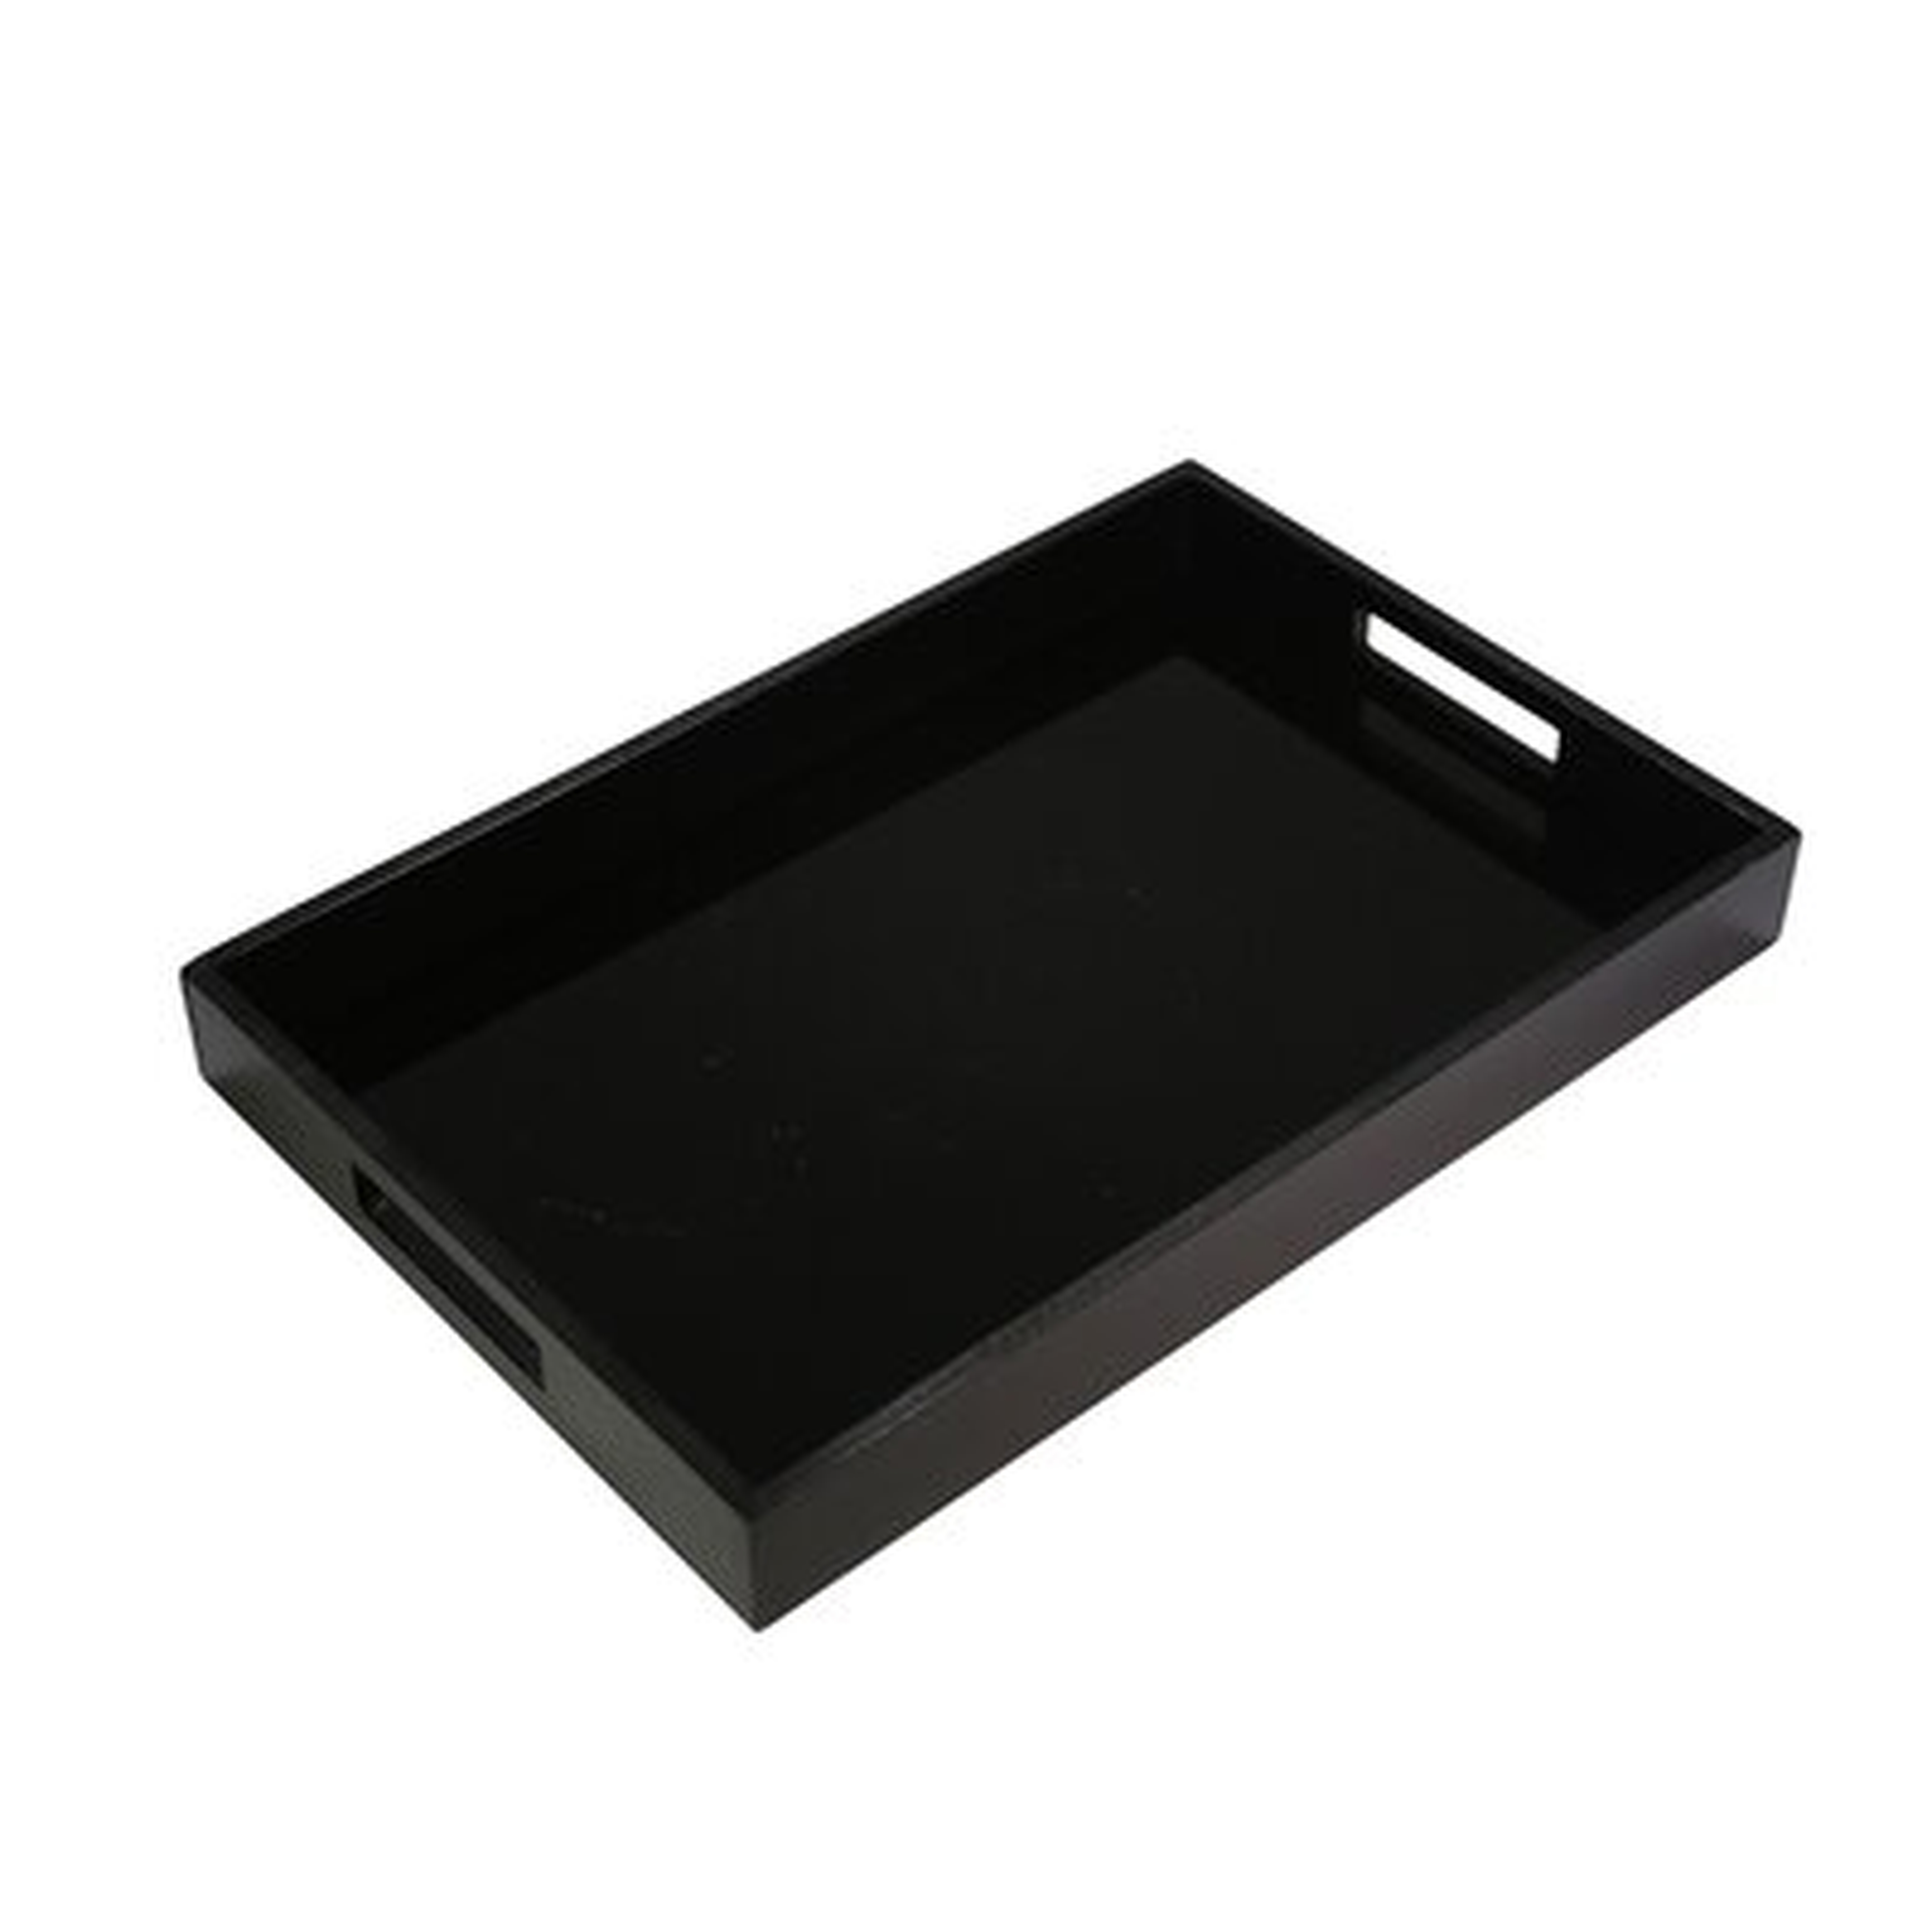 Bradshaw 18" Simple Black Serving Tray - Contemporary Decorative Wood and Glass Serving Tray - AllModern